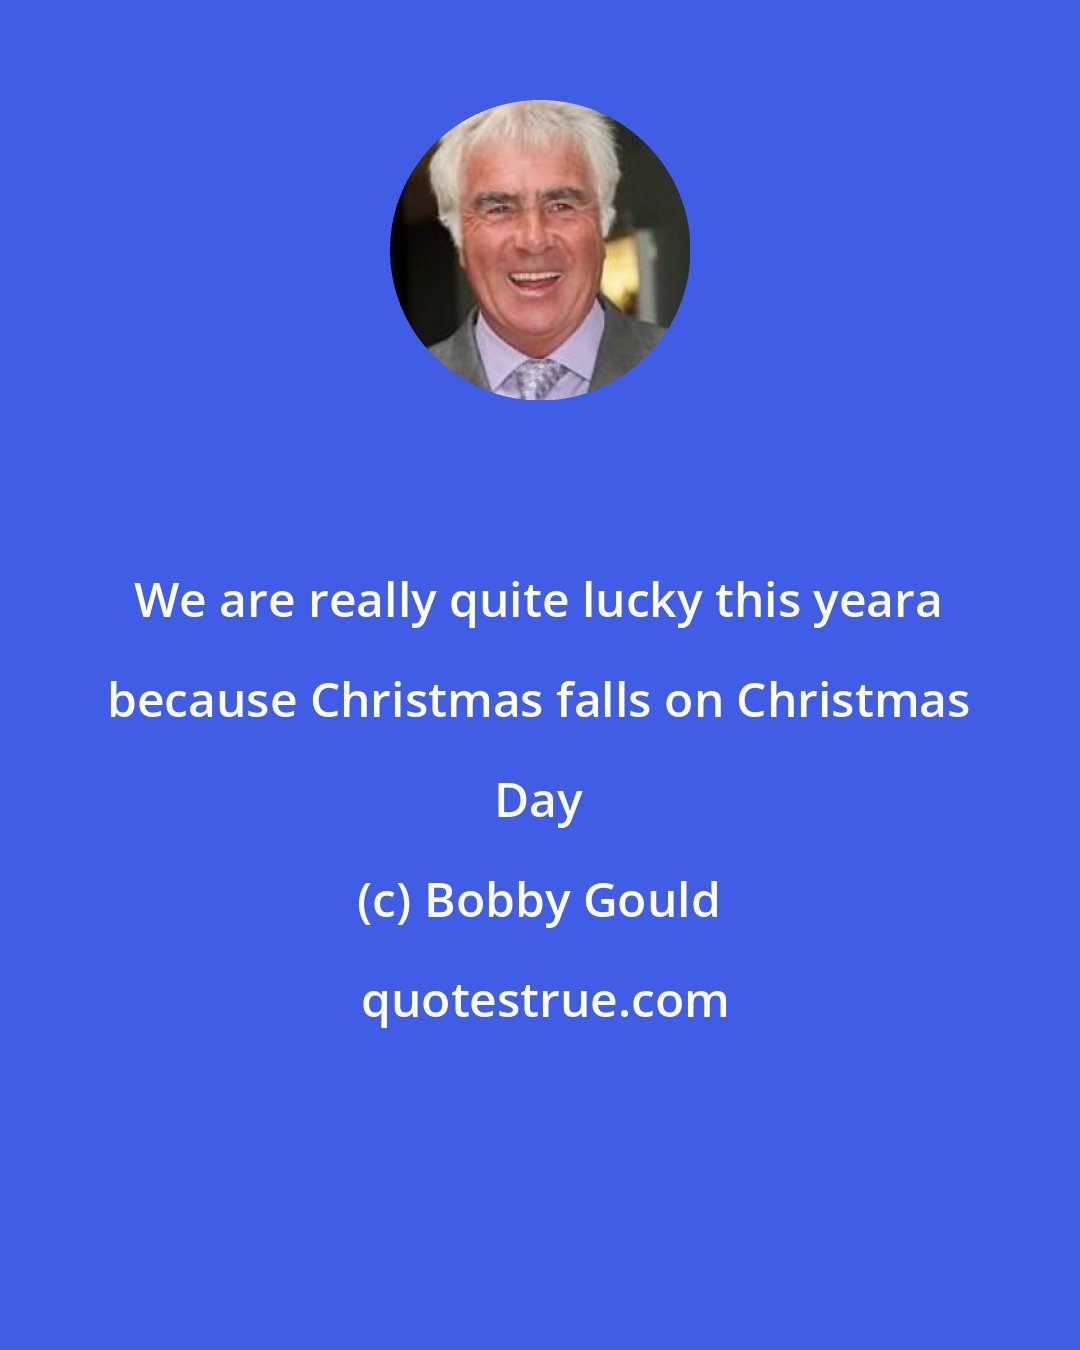 Bobby Gould: We are really quite lucky this yeara because Christmas falls on Christmas Day